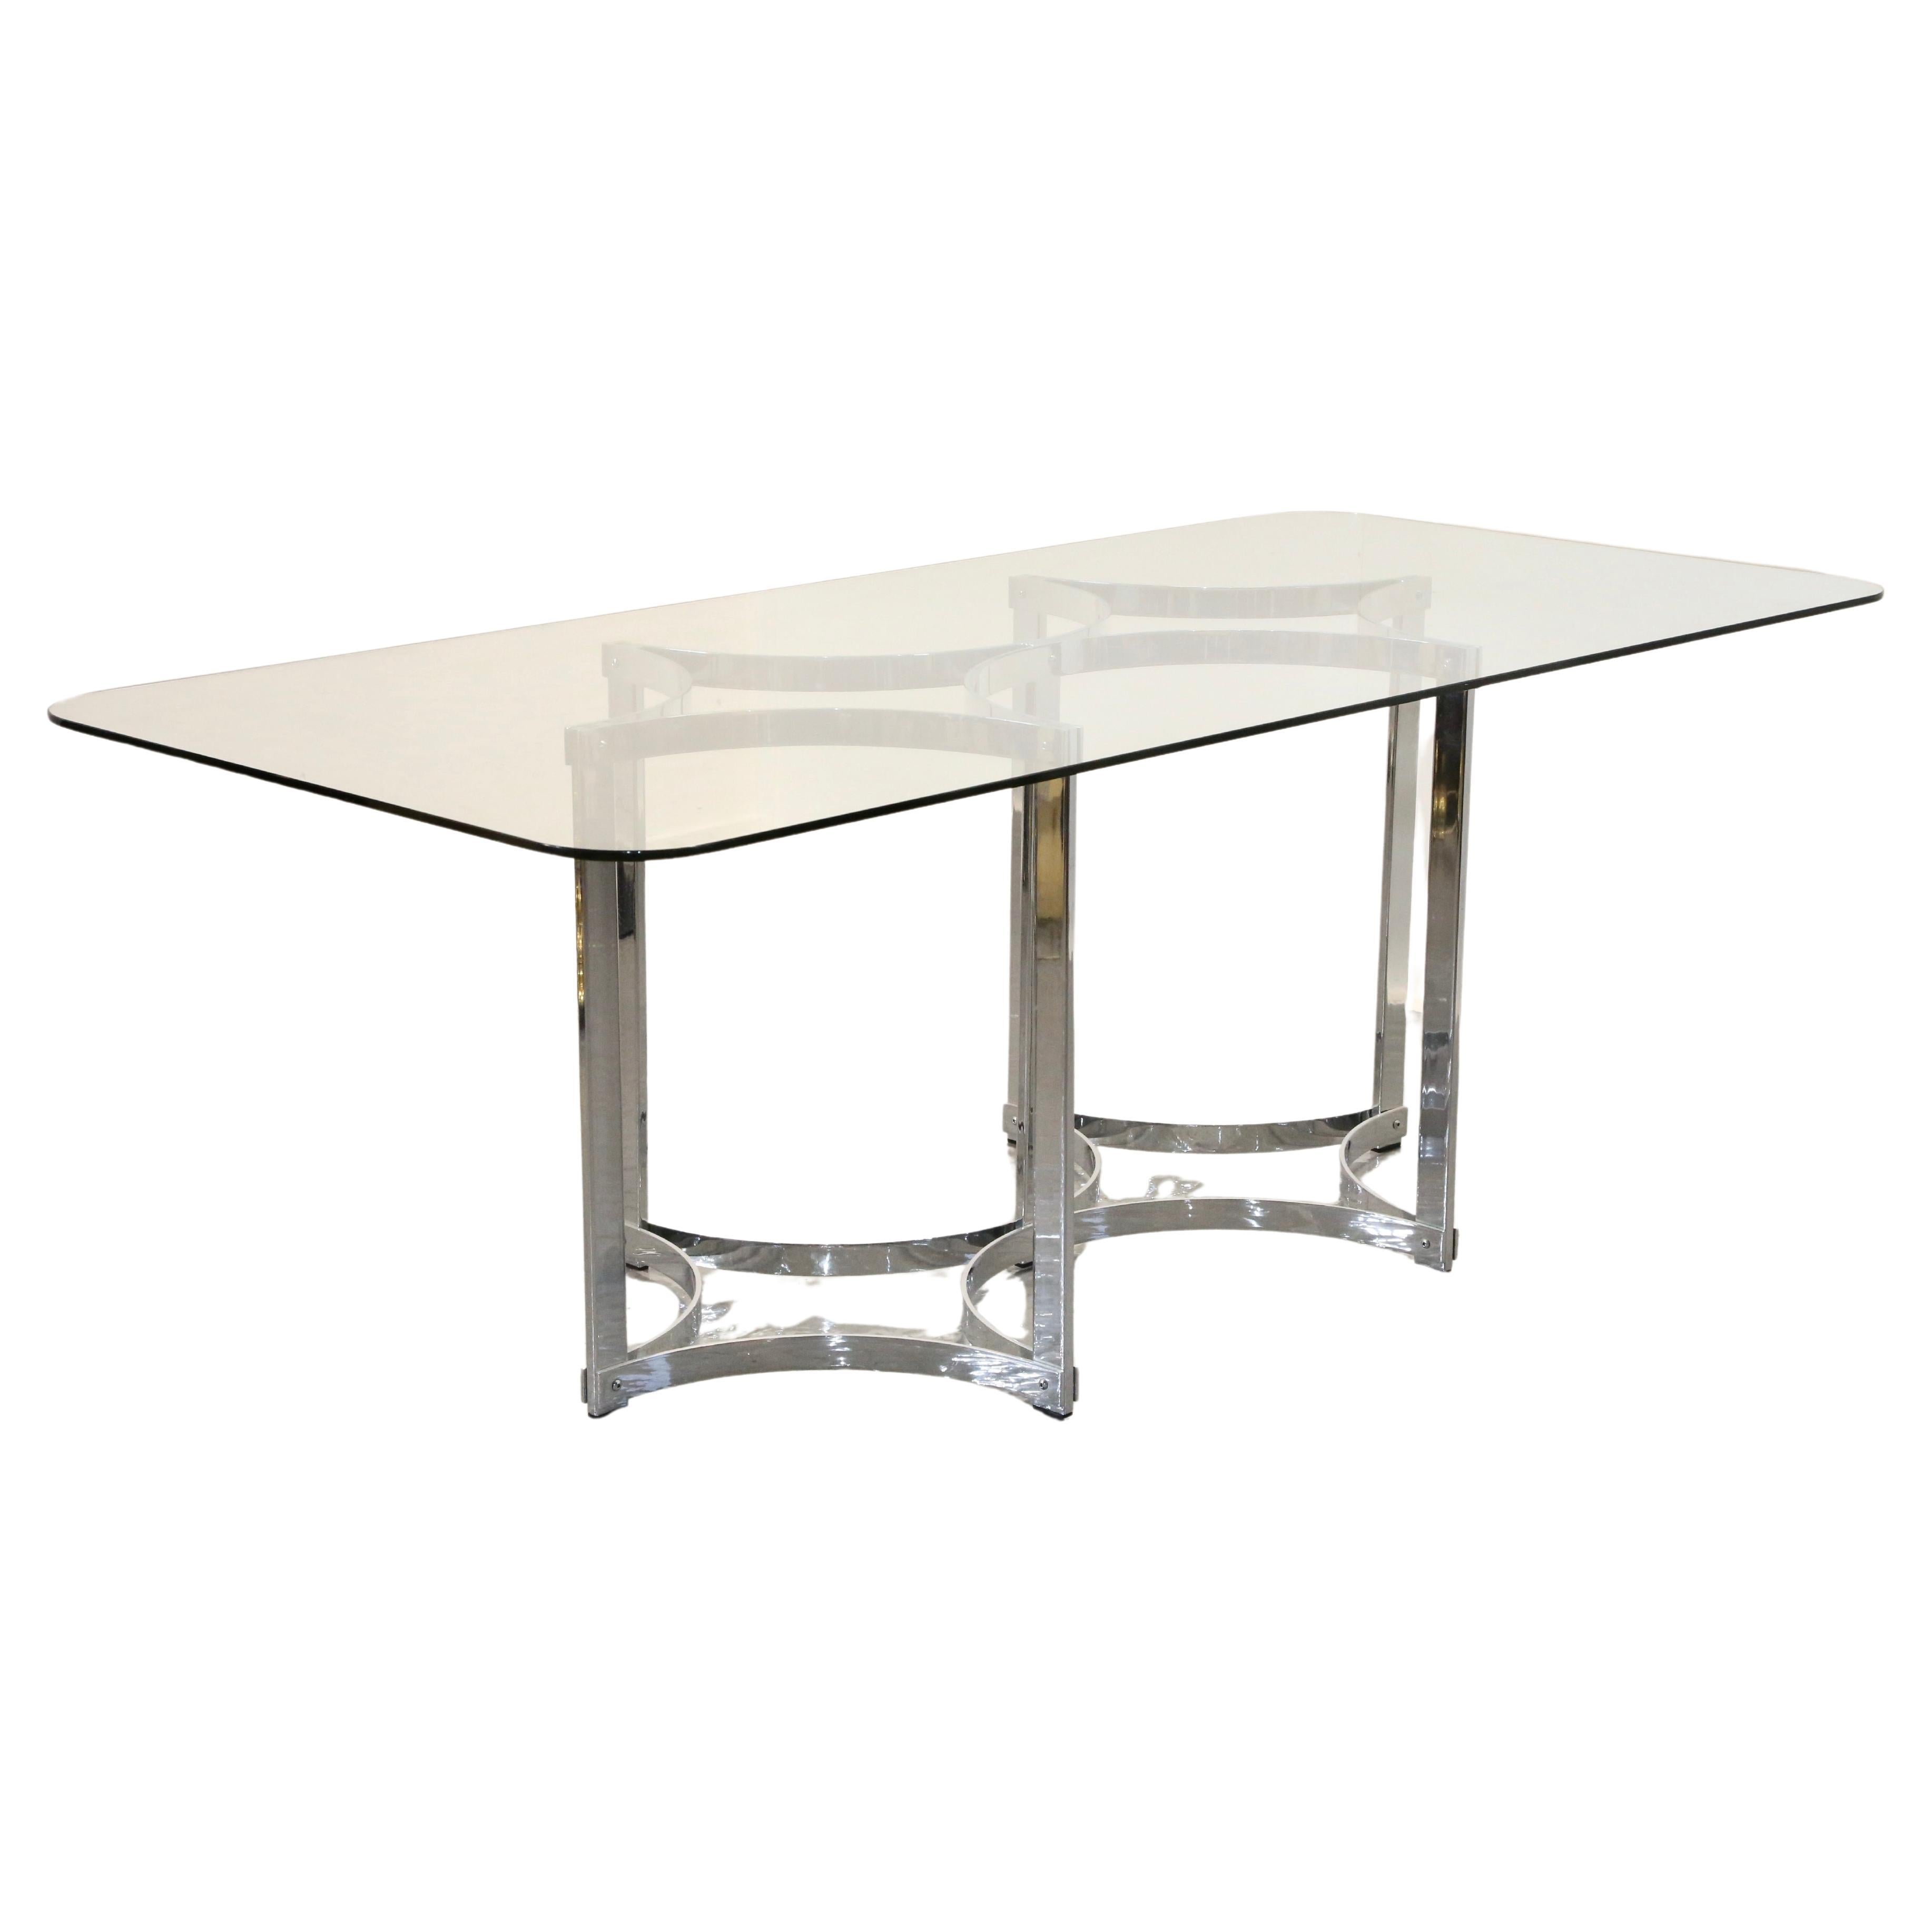 Richard Young For Merrow Associates Chrome & Glass Dining Table For Sale